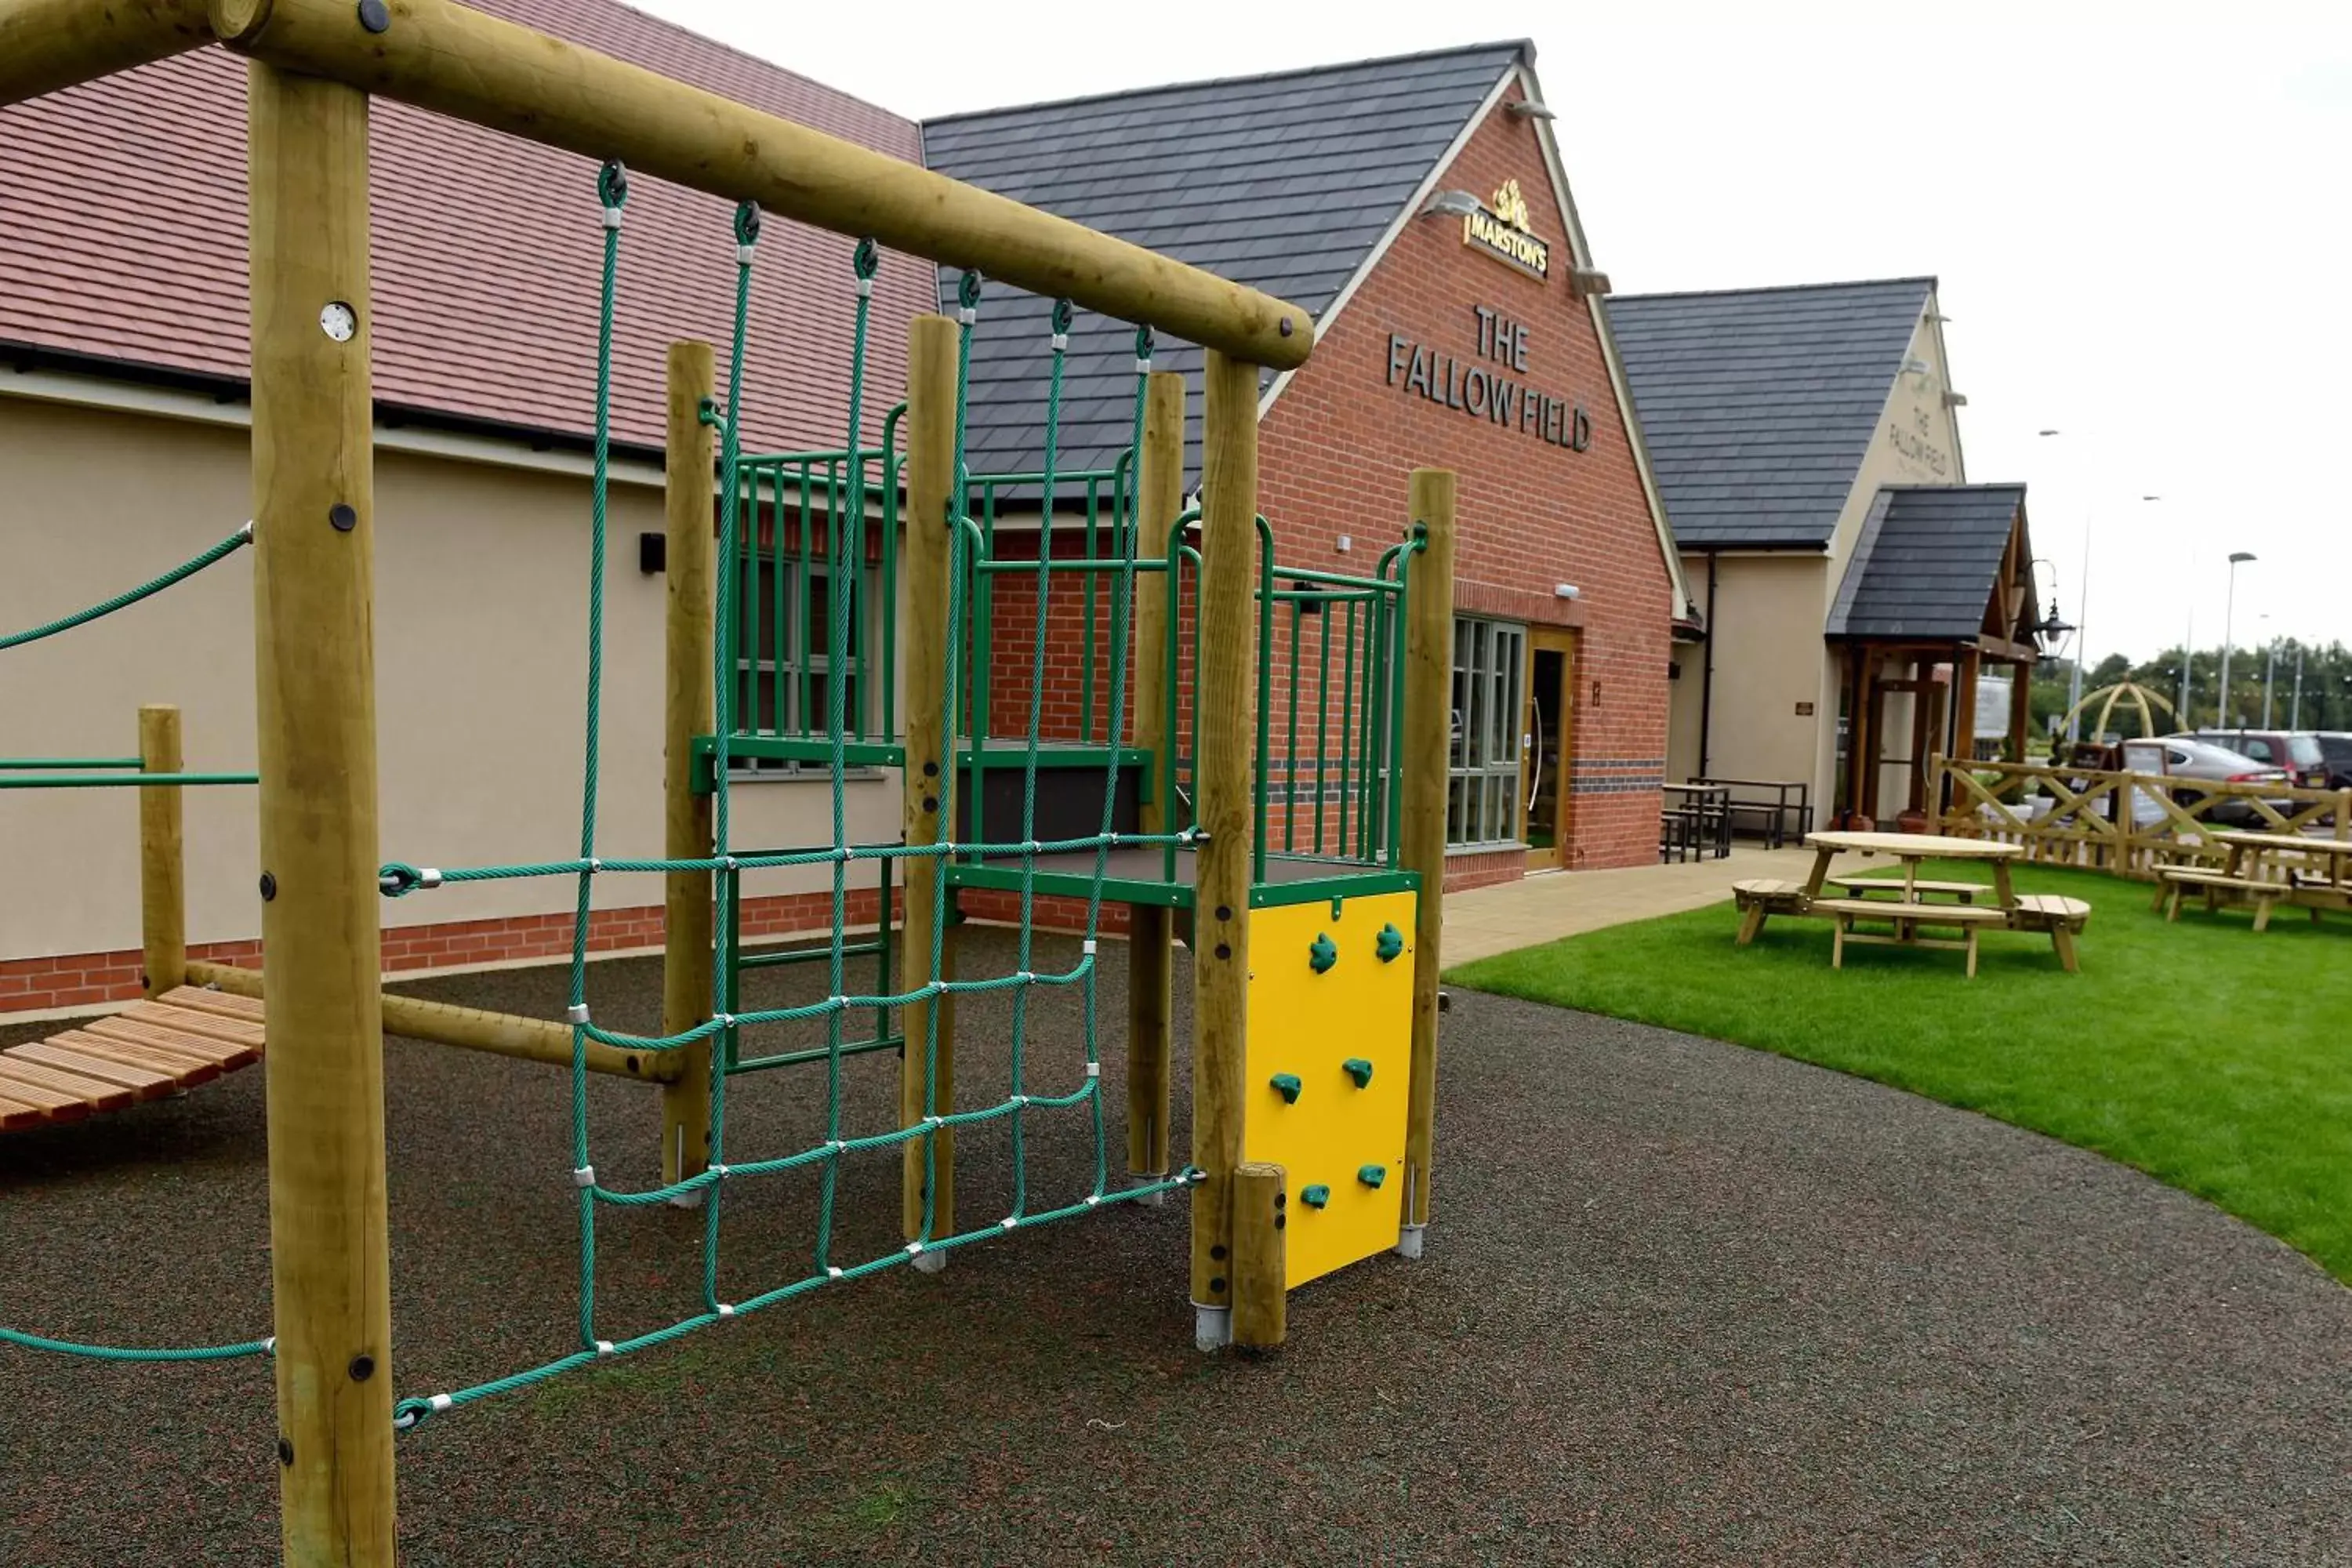 Children play ground, Property Building in Fallow Field, Telford by Marston's Inns